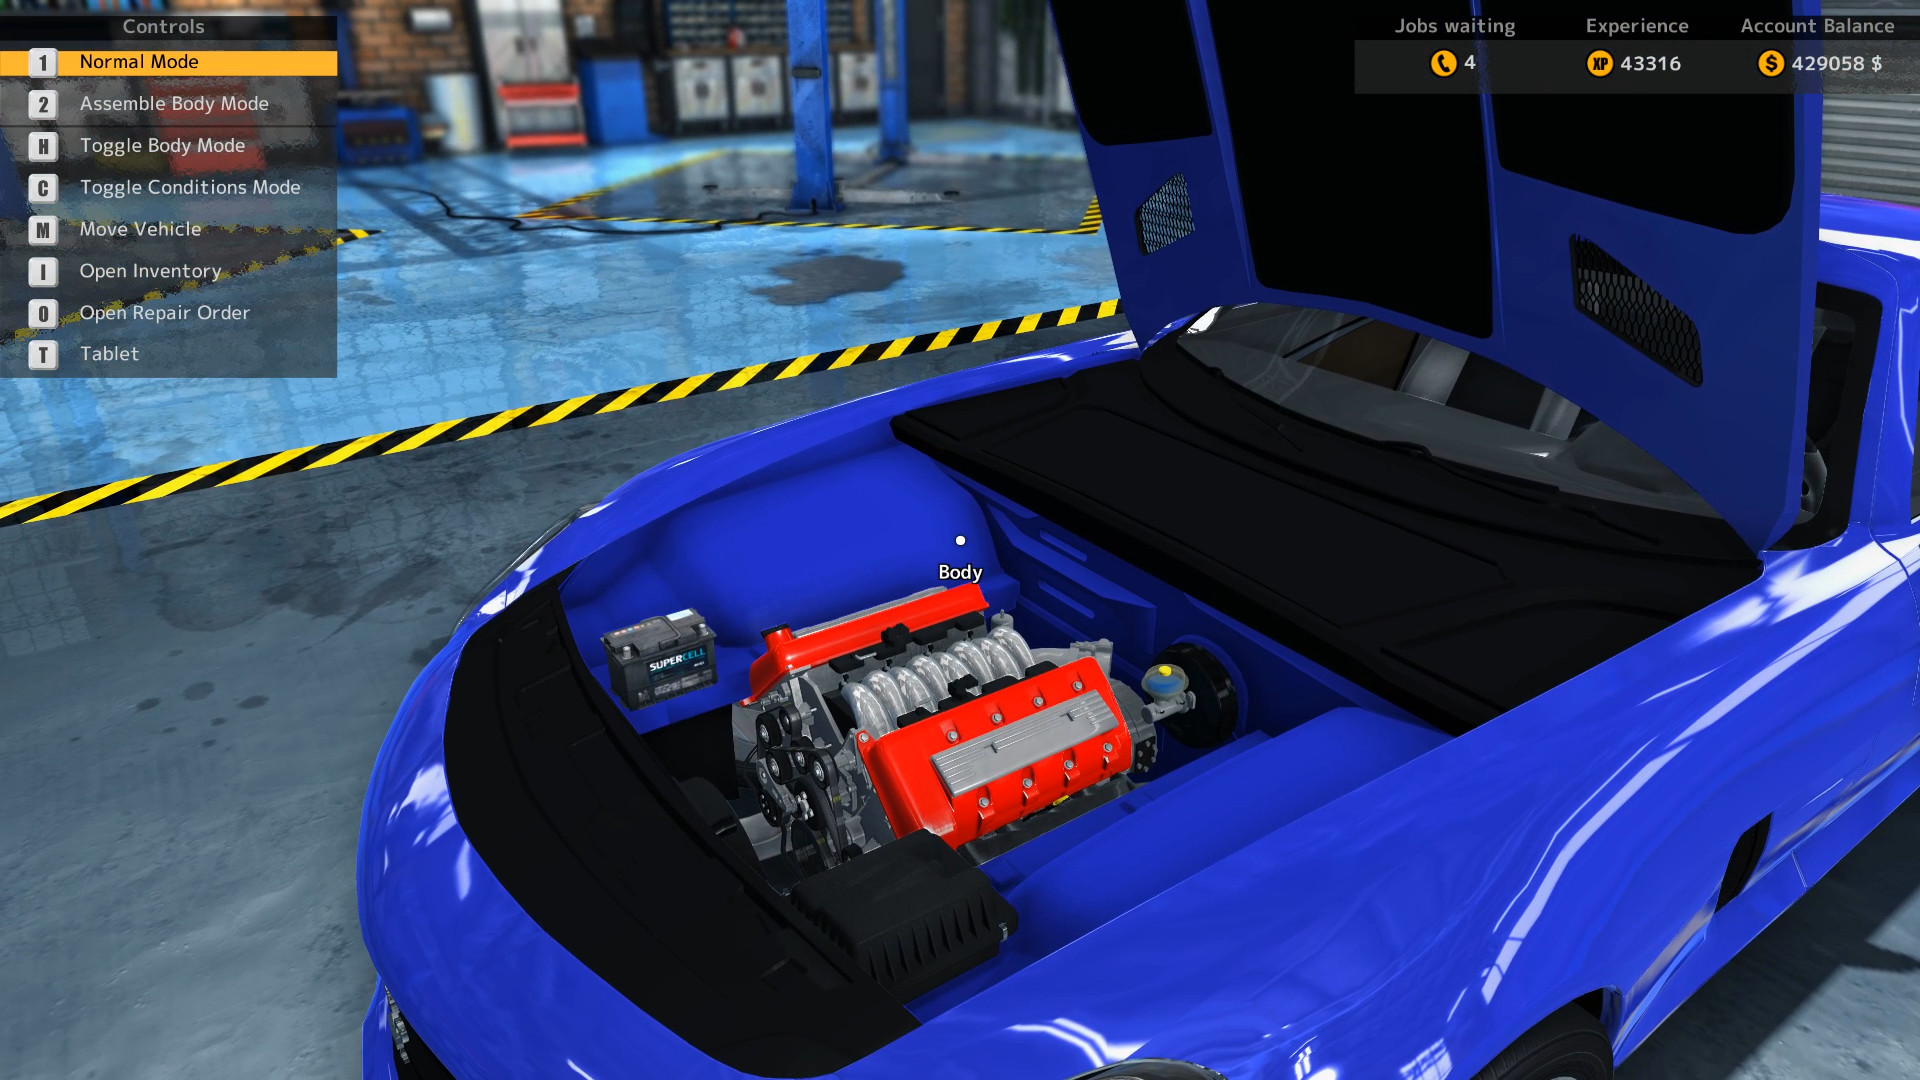 Engine compartment view of the Royal GTR after a complete rebuild in Car Mechanic Simulator 2015.